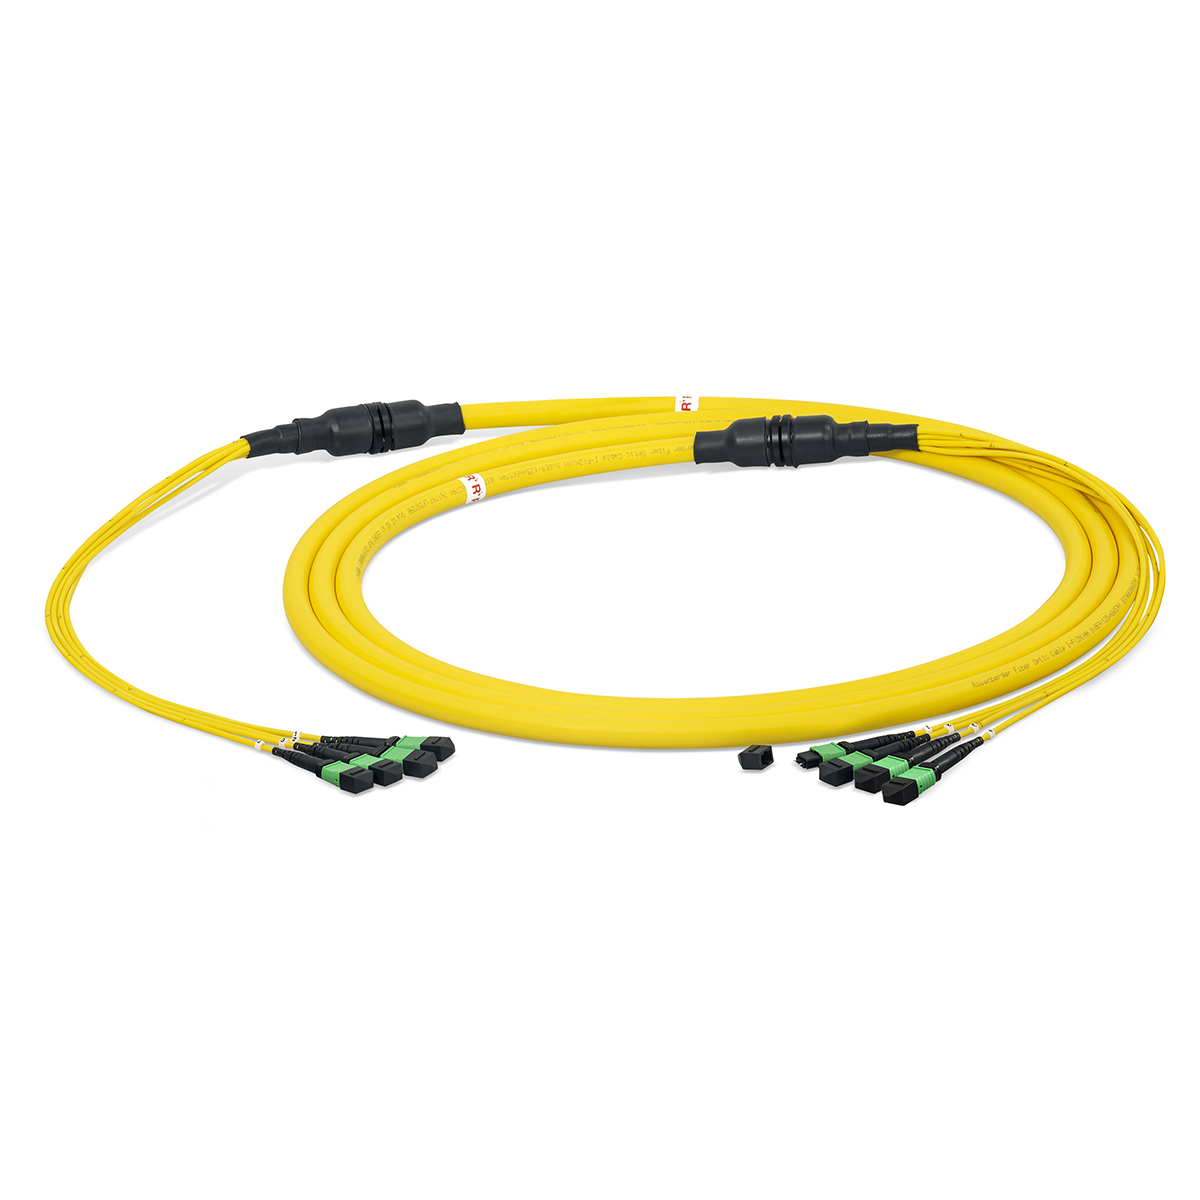 Fiber optic trunk cable breakout 32 fibers singlemode OS2, MTP®-OCTO-PC-m/ MTP®-OCTO-PC-m, I-F(ZN)HH